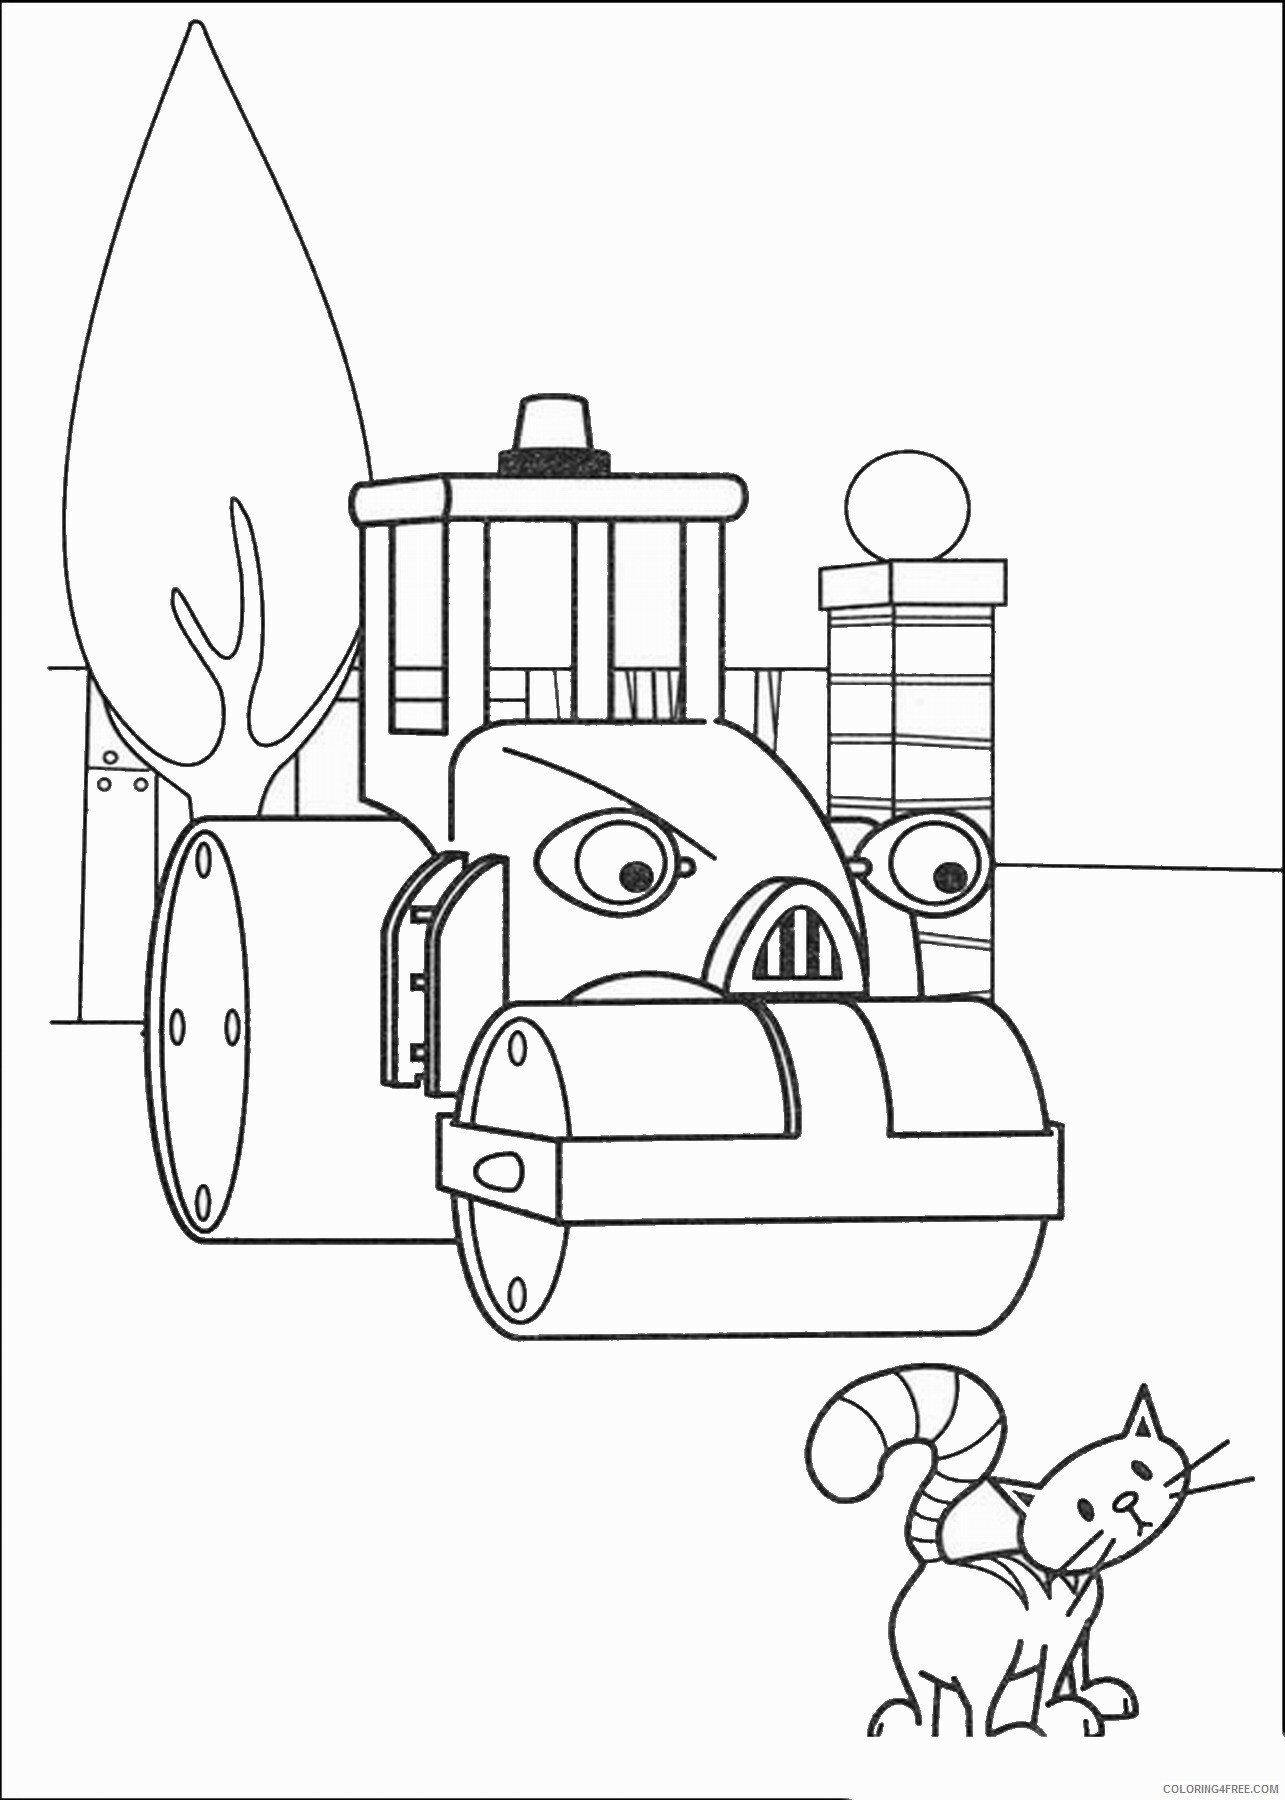 Bob the Builder Coloring Pages TV Film bob the builder_09 Printable 2020 00959 Coloring4free